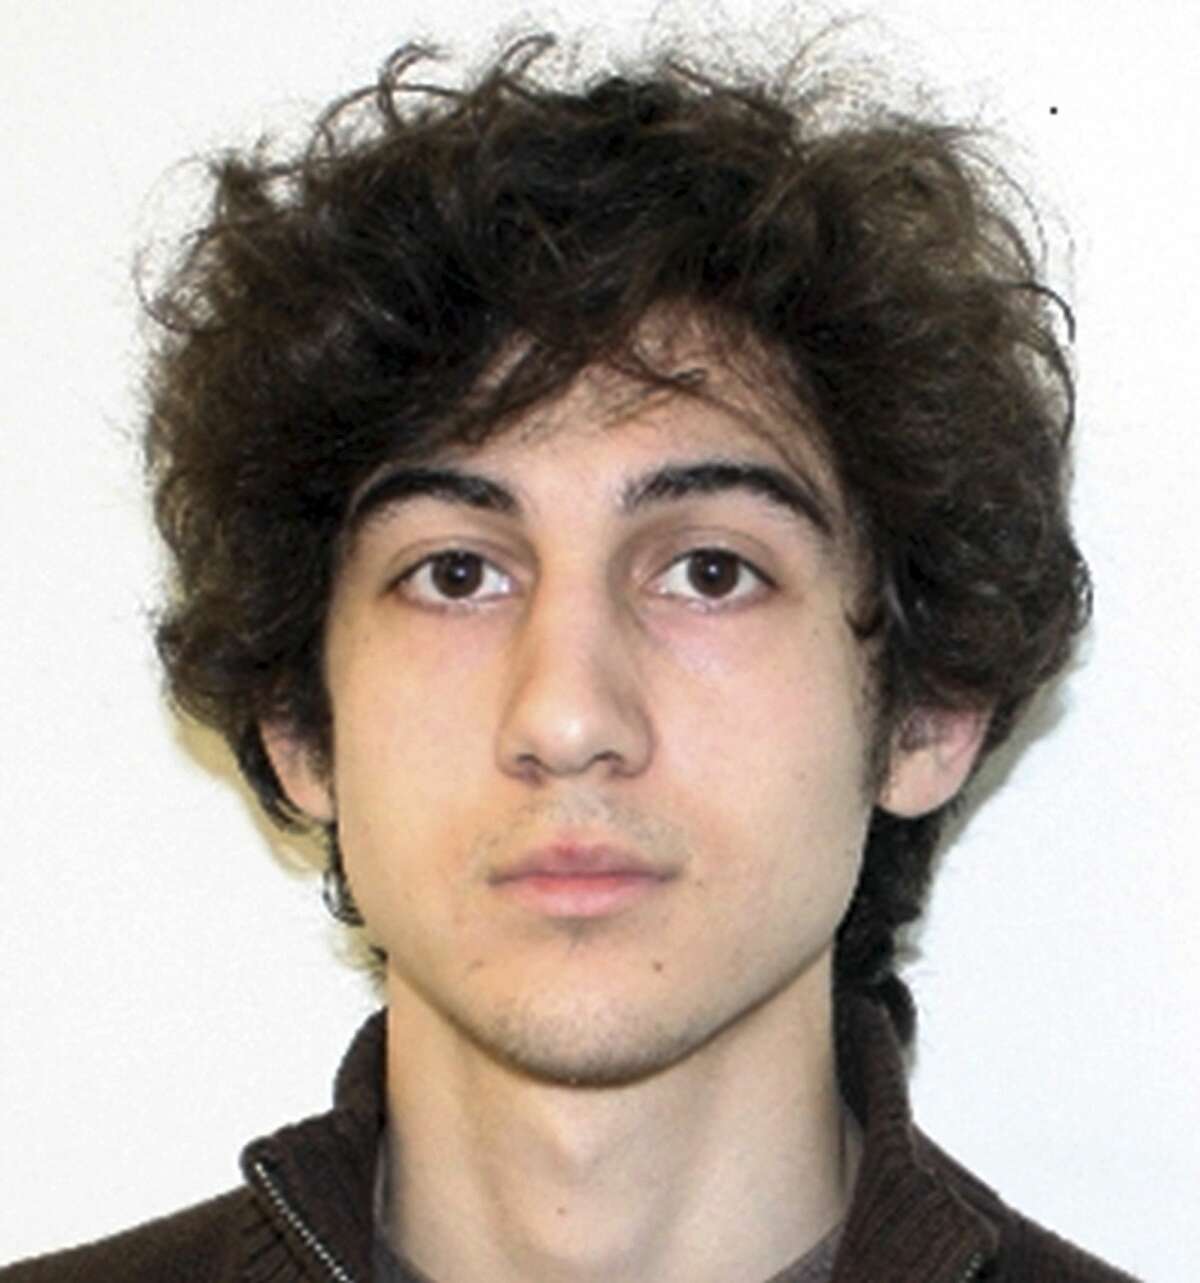 This undated photo released by the FBI on April 19, 2013 shows Dzhokhar Tsarnaev. On Friday, May 15, 2015, Tsarnaev was sentenced to death by lethal injection for the 2013 Boston Marathon terror attack.